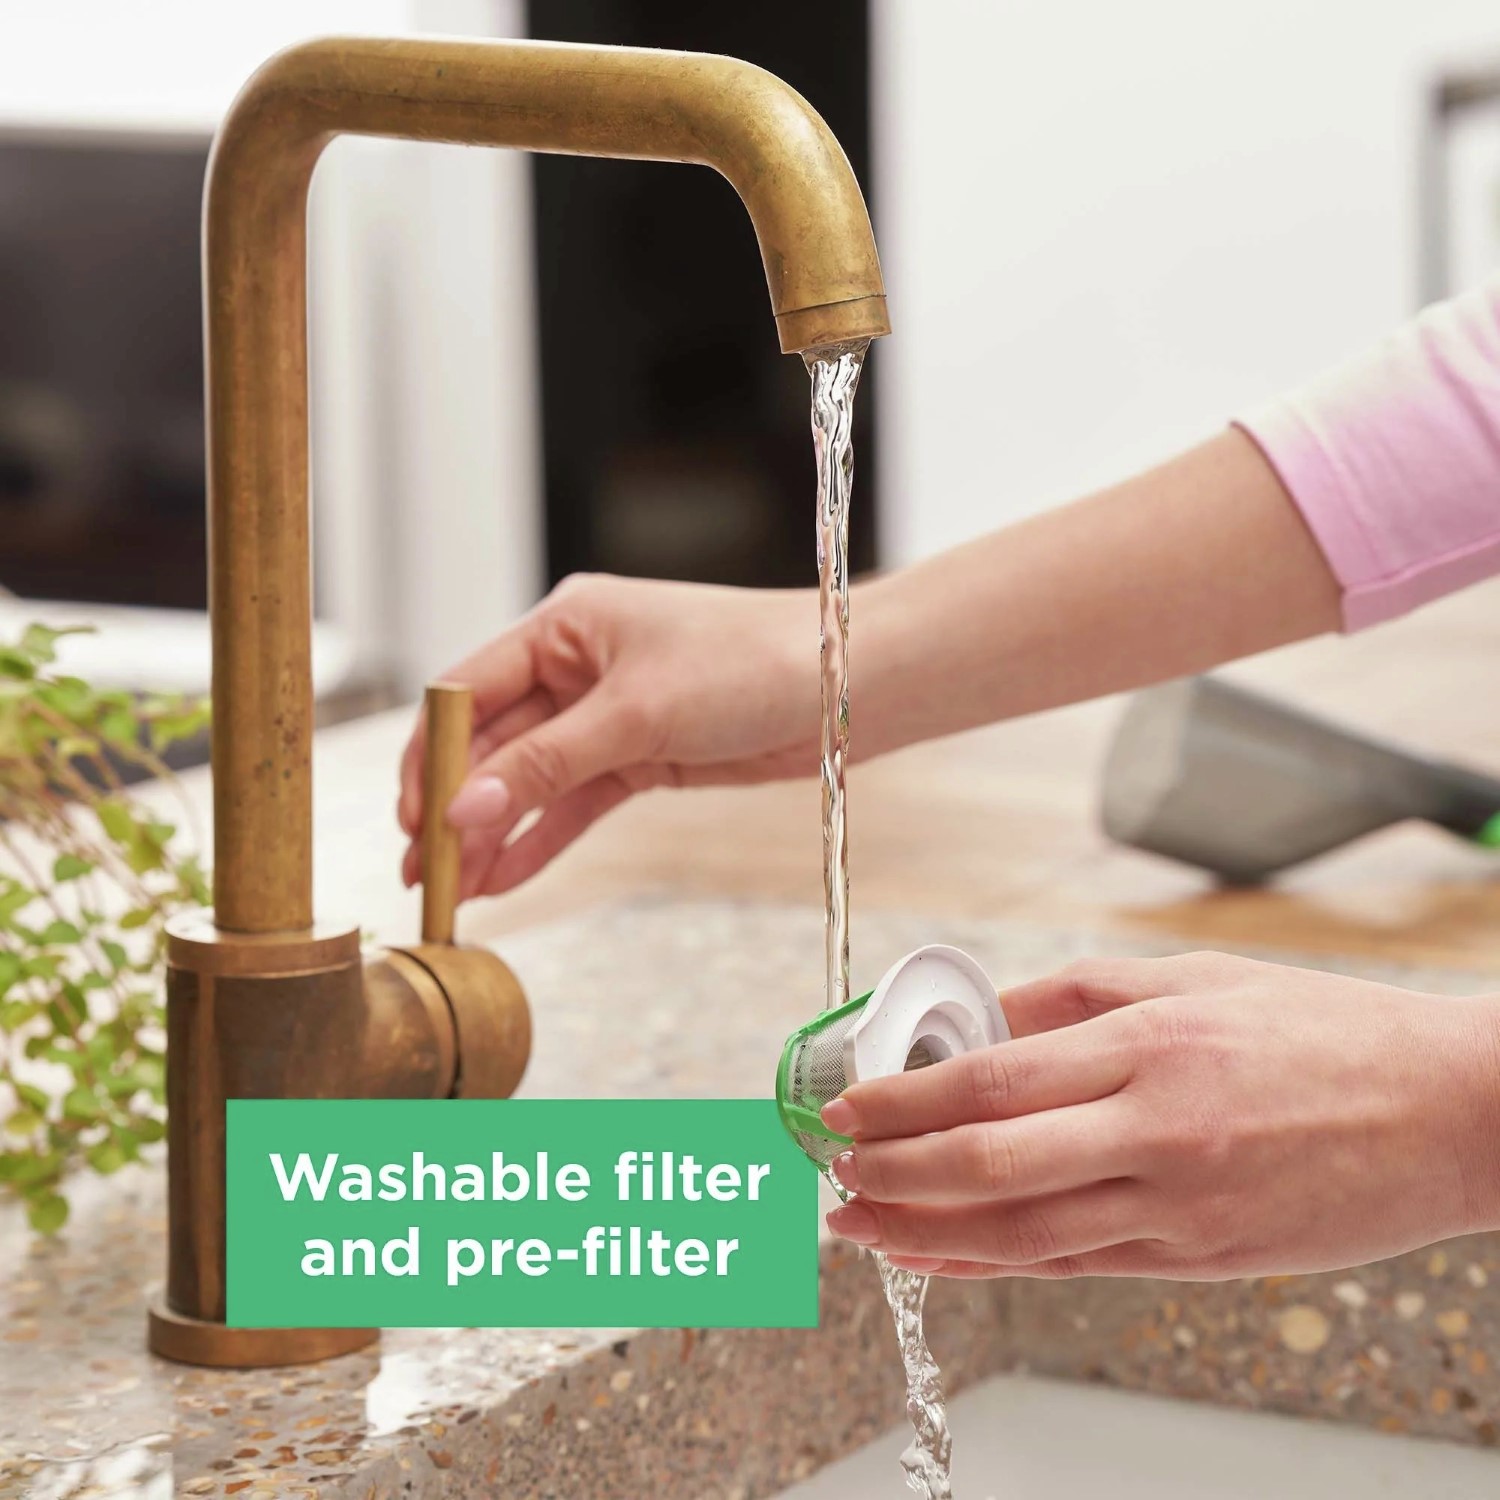 Washable filter and pre-filter.